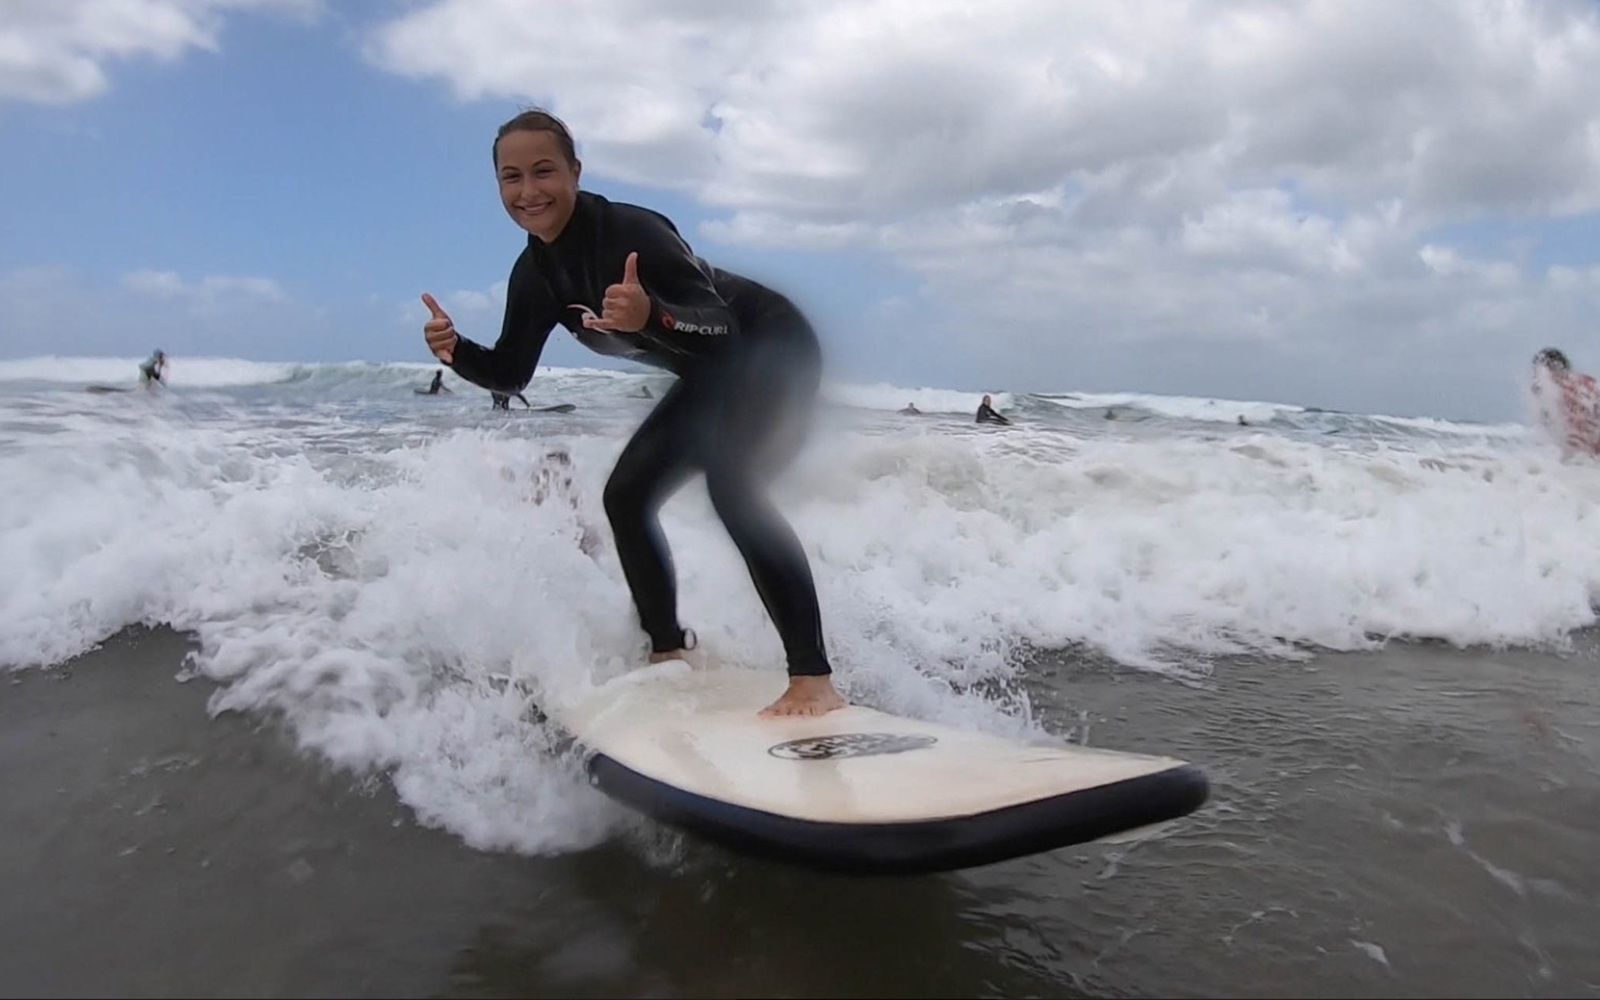 Victoria catches a wave on this week's blog!